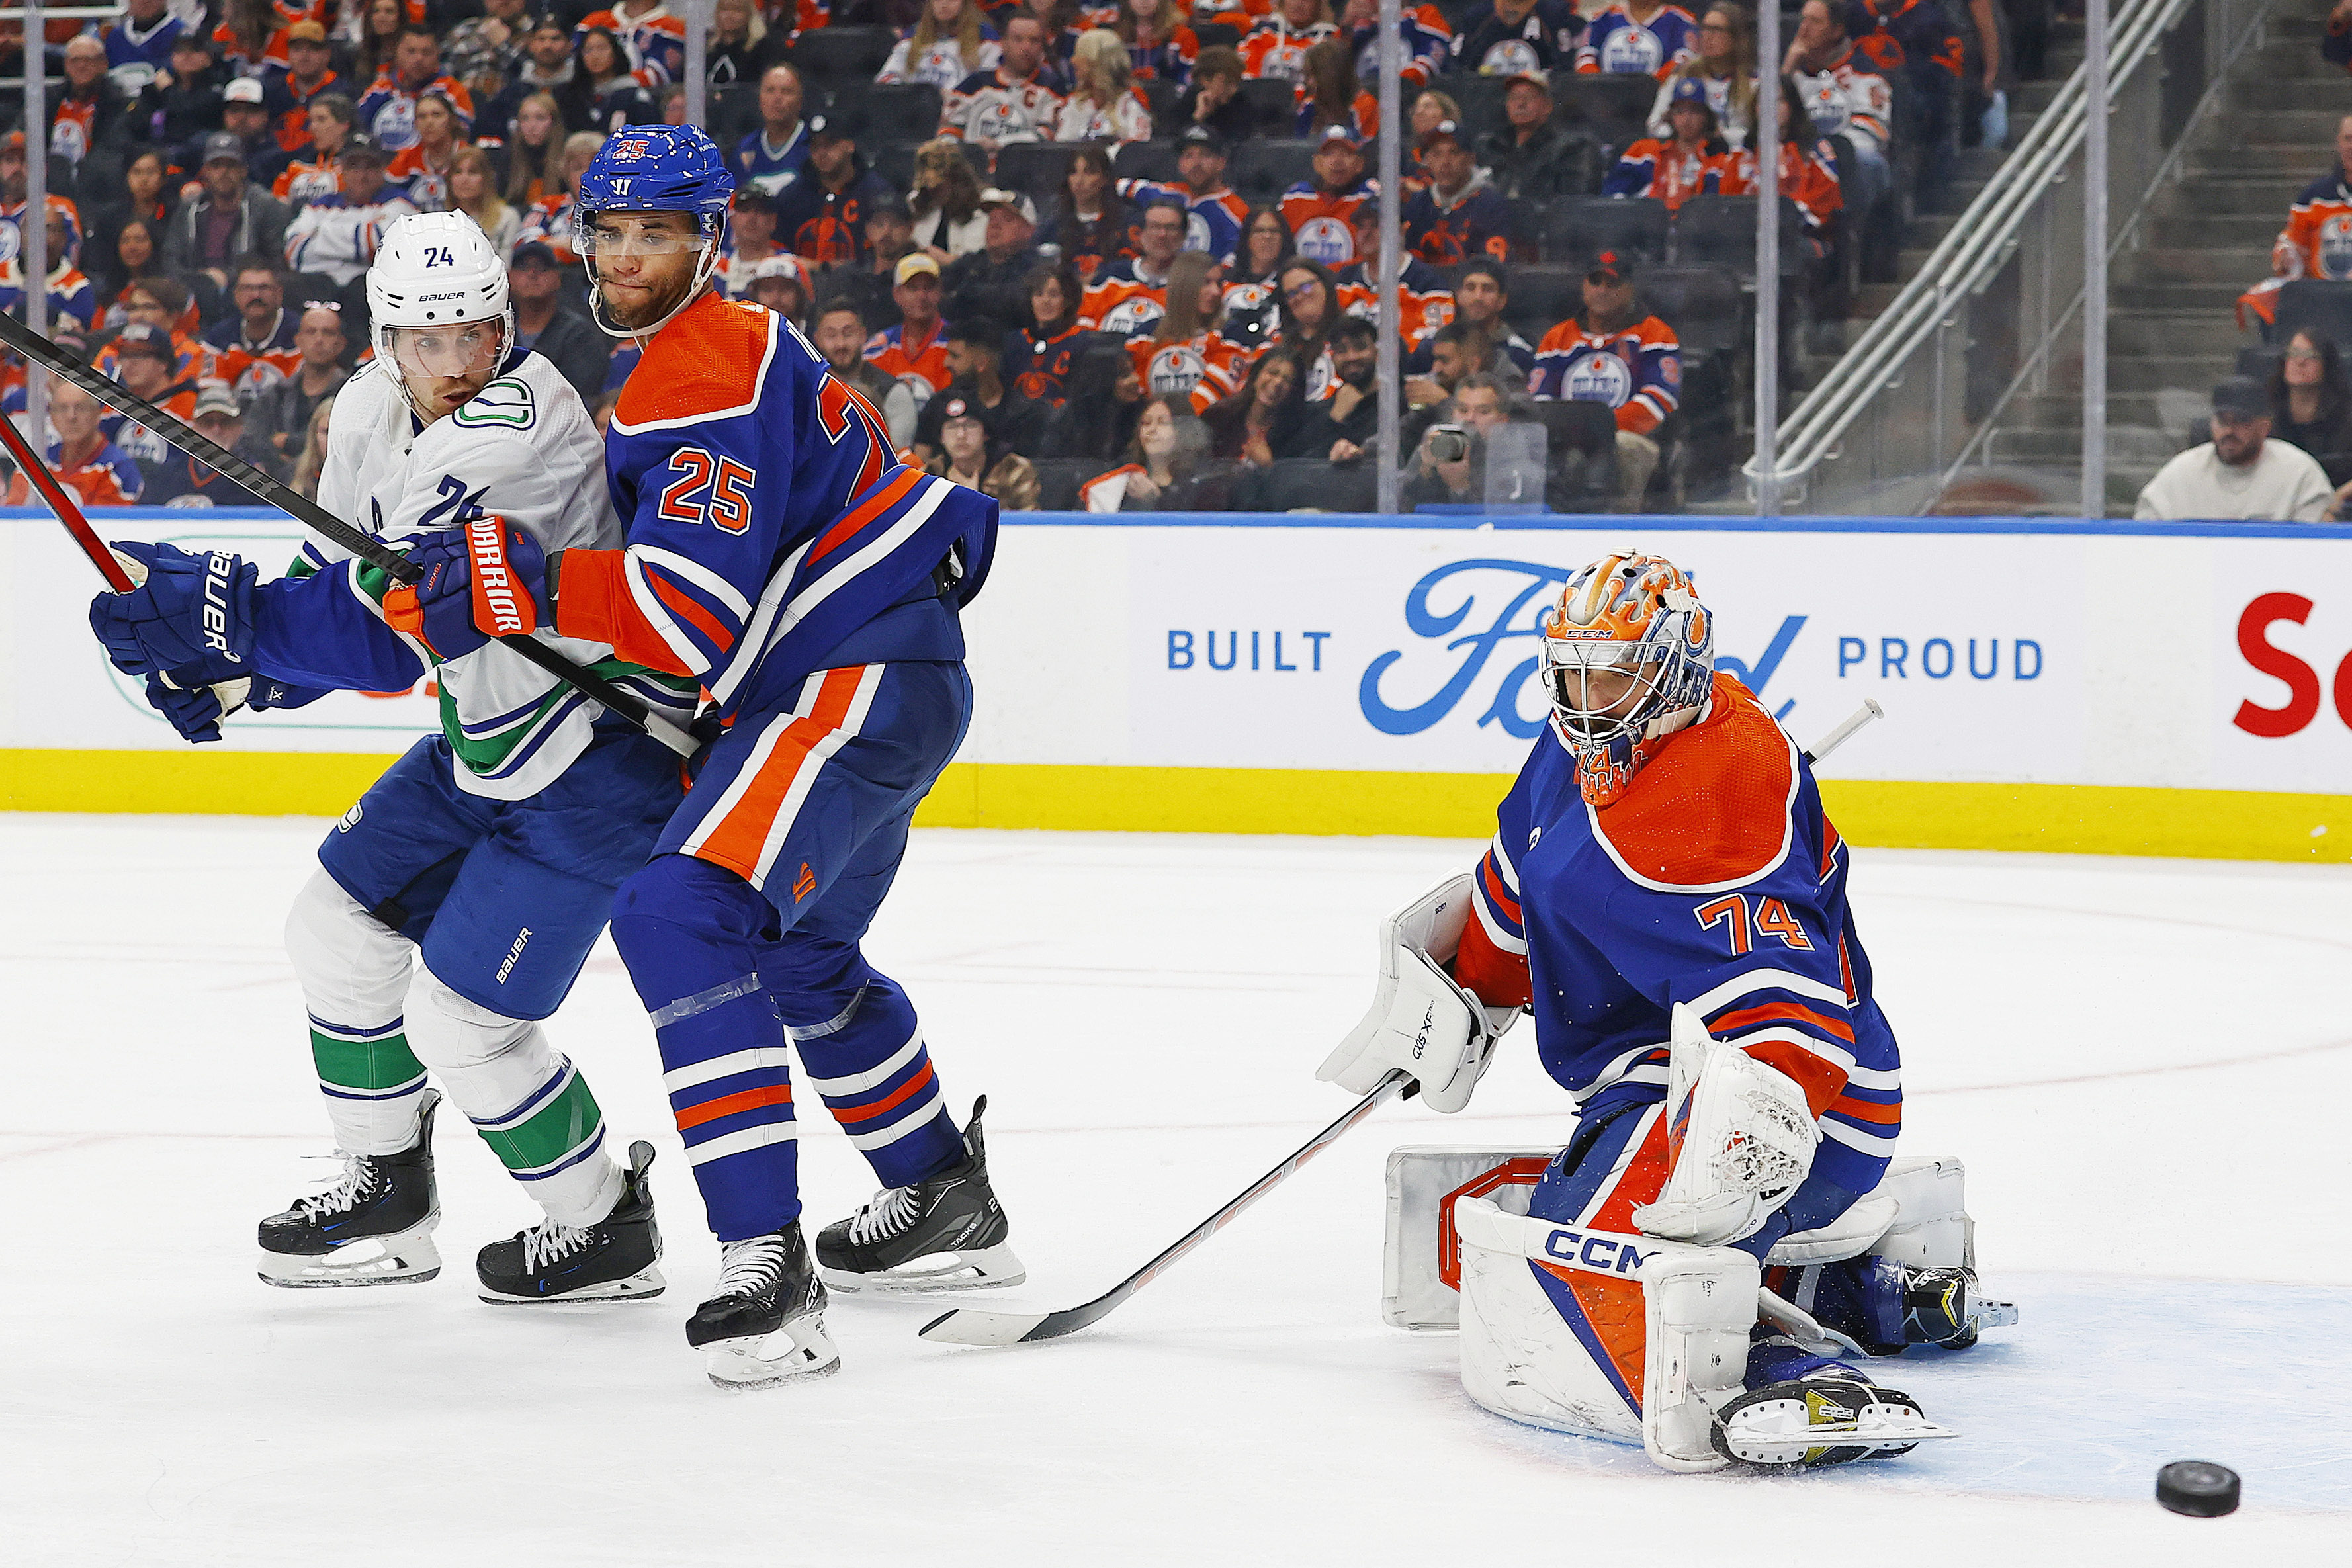 Casey DeSmith shines, Canucks beat Oilers for second straight game